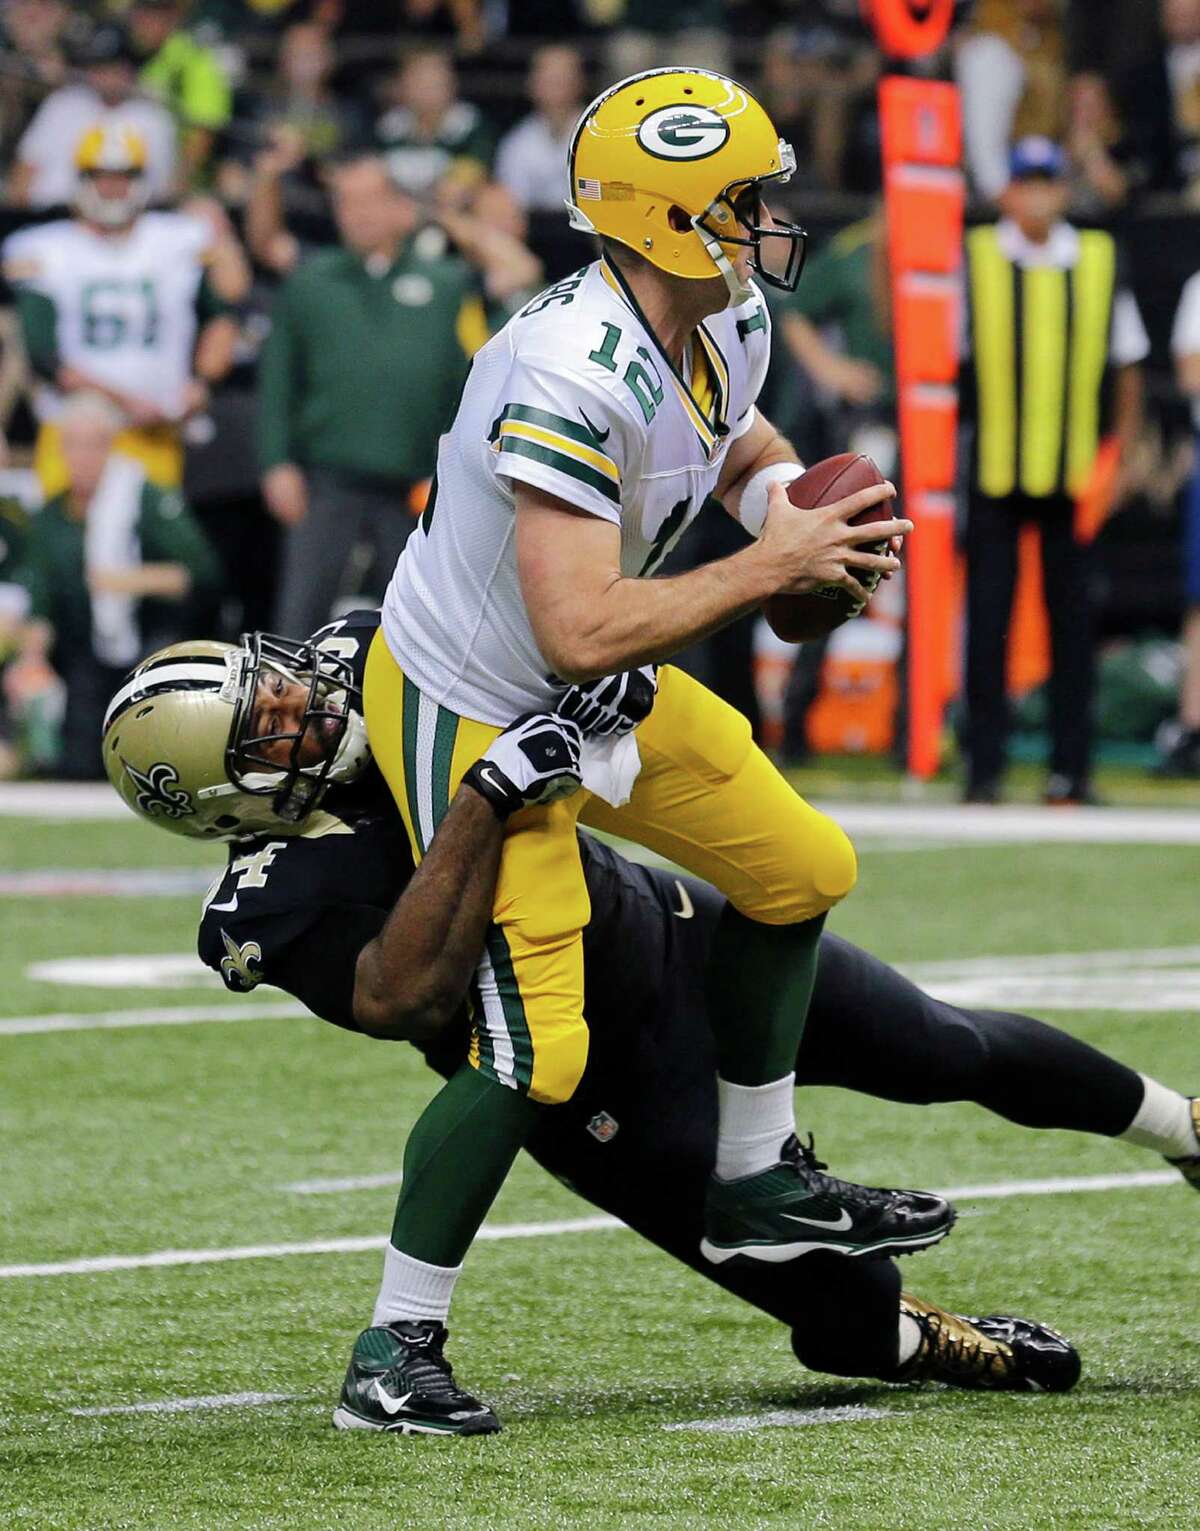 Green Bay Packers quarterback Aaron Rodgers (12) is sacked by New Orleans Saints defensive end Cameron Jordan (94) in the first half of an NFL football game in New Orleans, Sunday, Oct. 26, 2014. (AP Photo/Bill Haber)